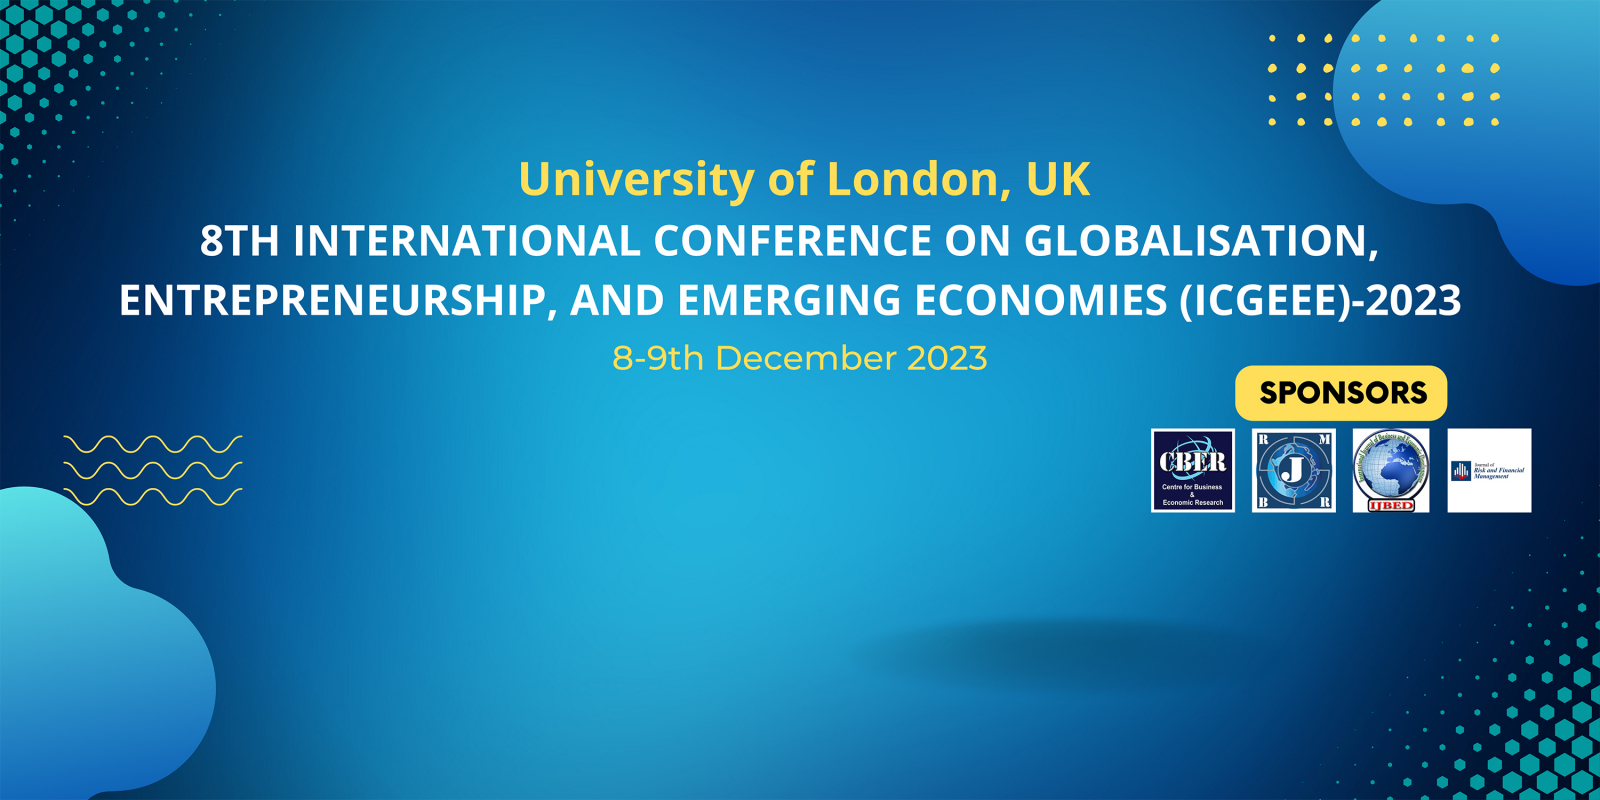 8th International Conference on Globalisation, Entrepreneurship, and Emerging Economies (ICGEEE)-2023